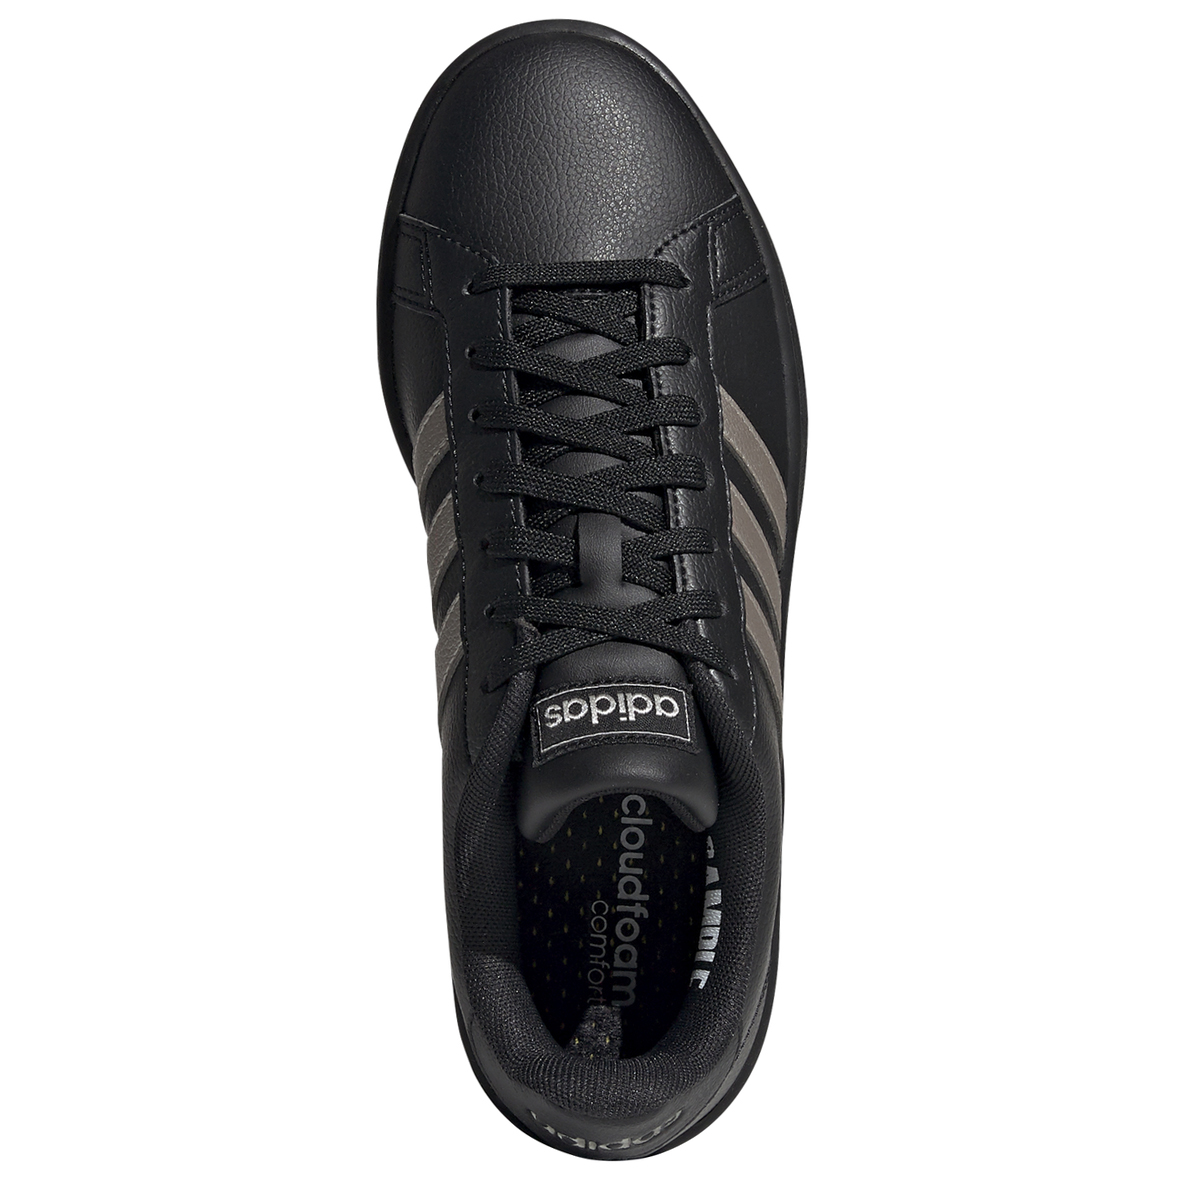 Zapatillas adidas Grand Court,  image number null